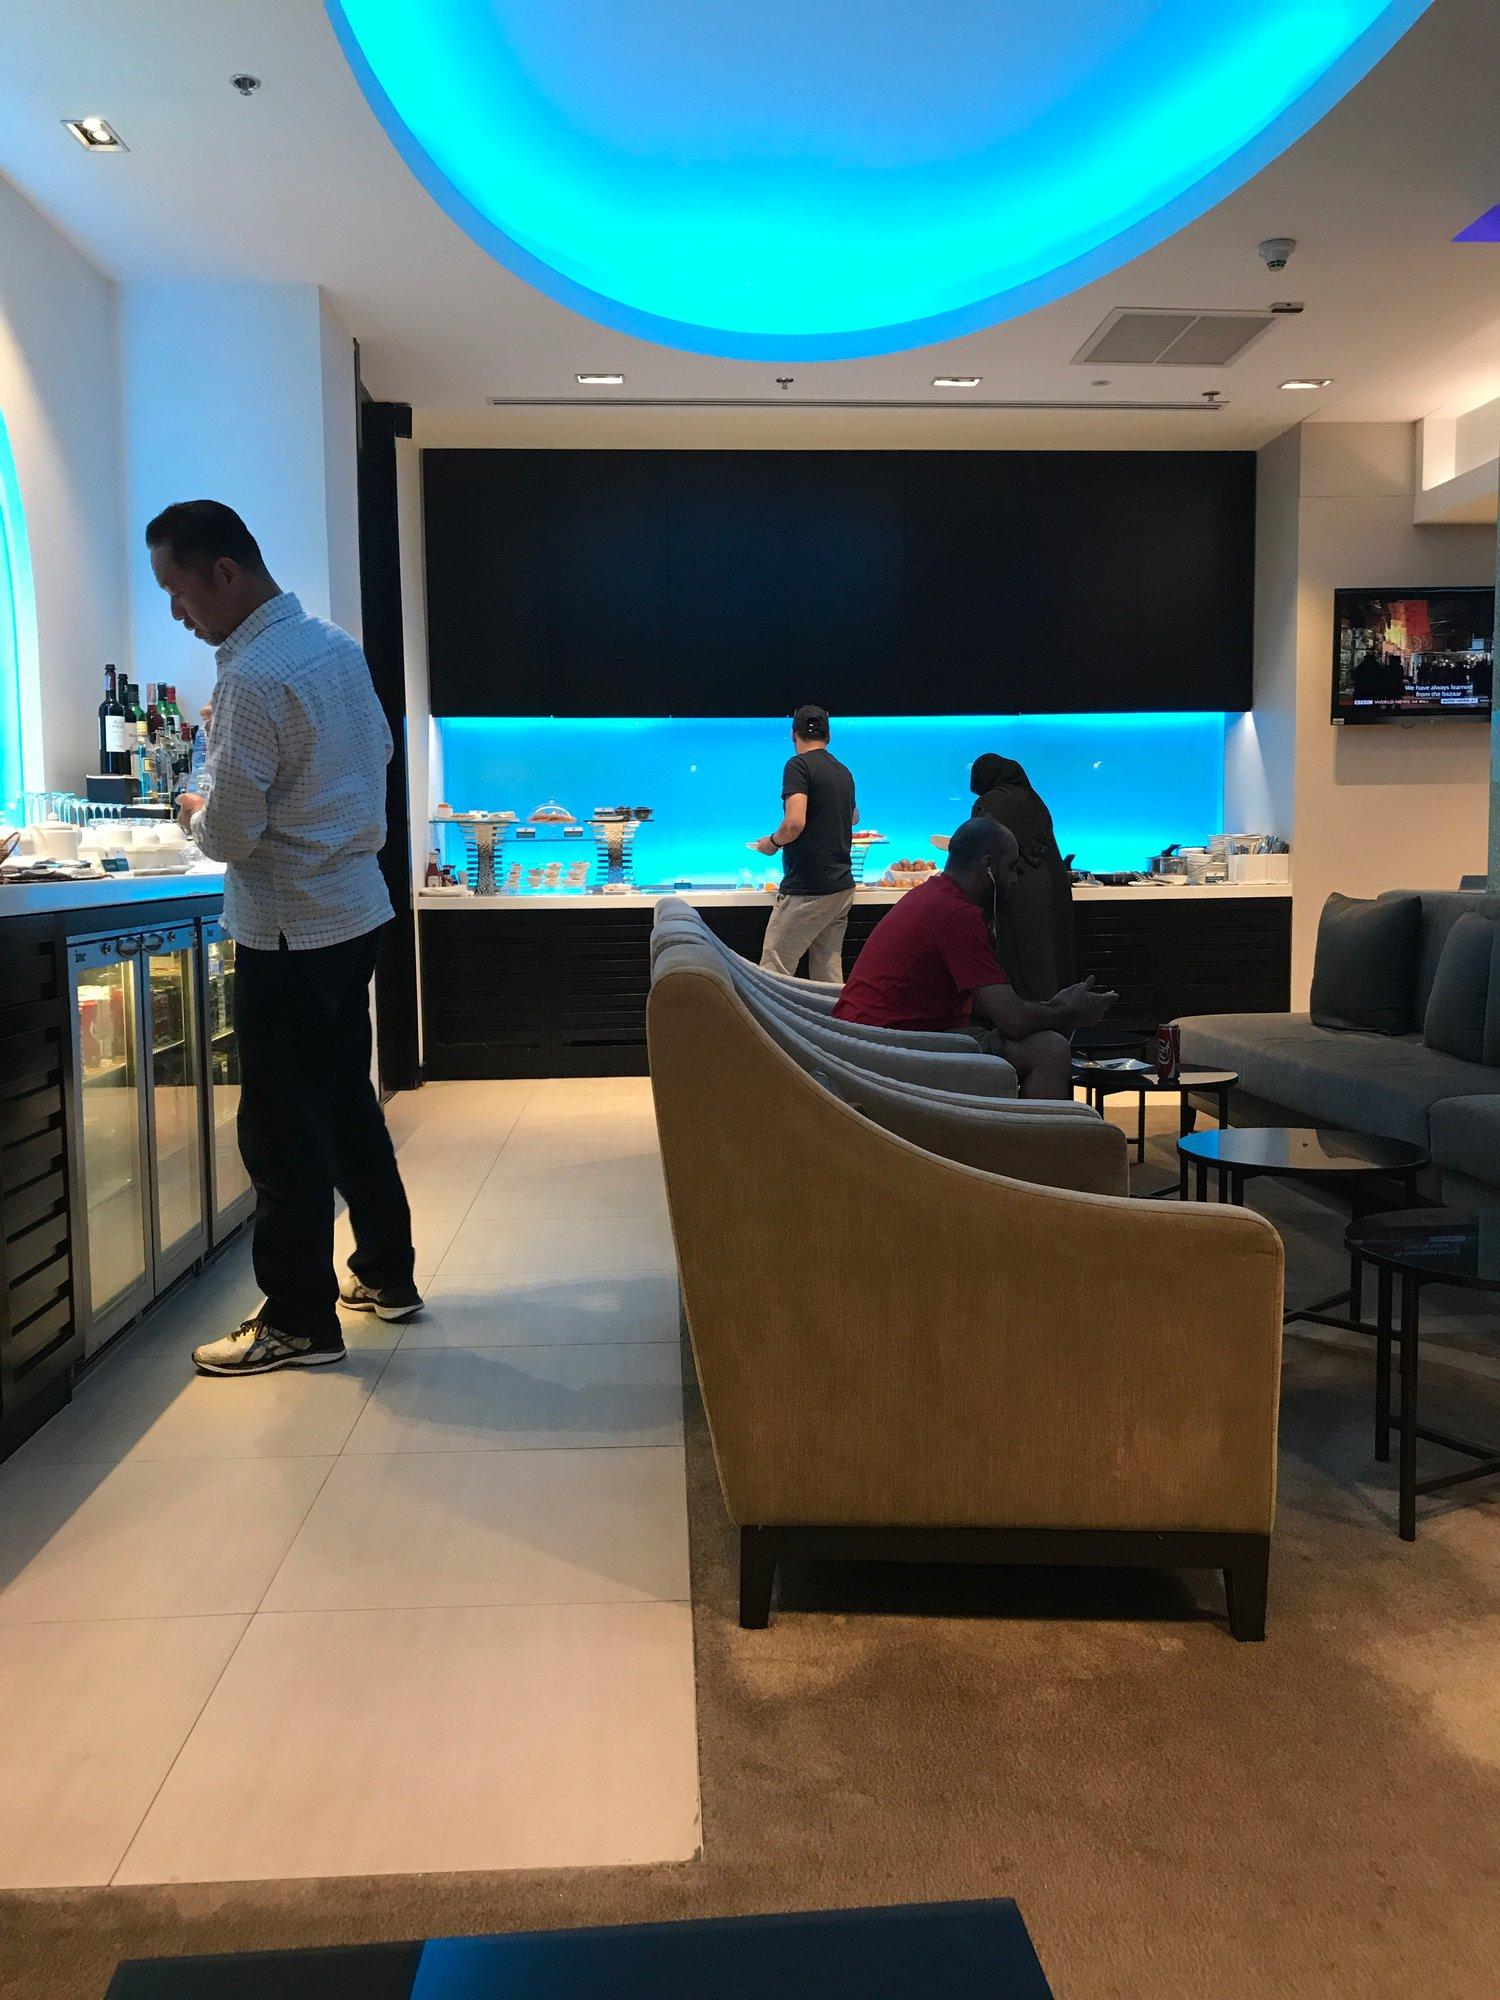 Oman Air First and Business Class Lounge image 14 of 50